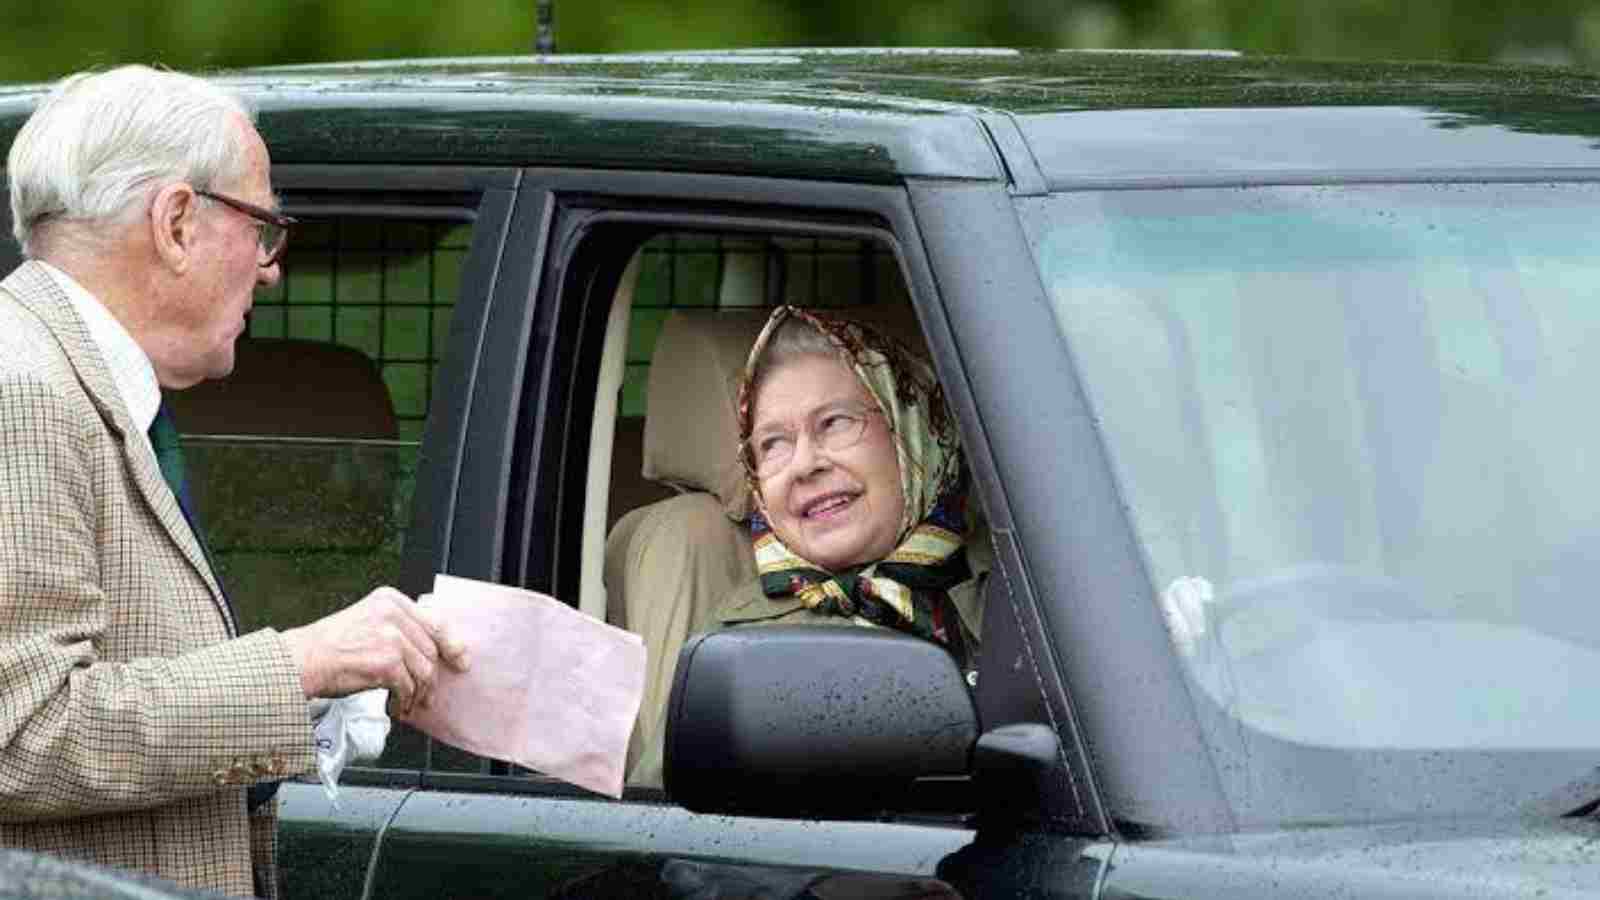 Queen Elizabeth II doesn't require a driving licence to drive around